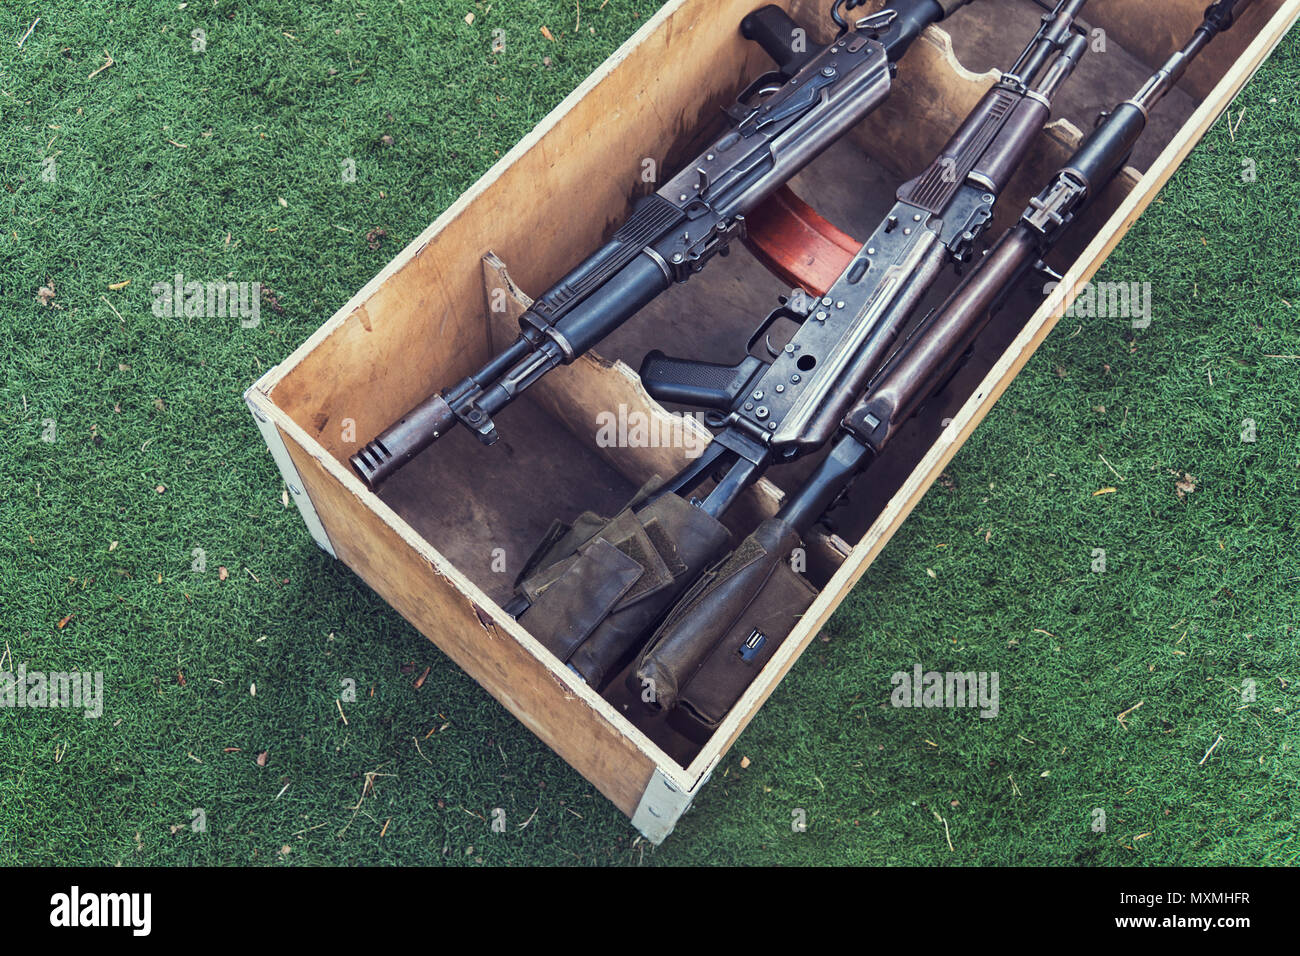 army box of ammunition with AK47 rifle and ammunition. An automatic weapon with a sniper scope in wood box Stock Photo